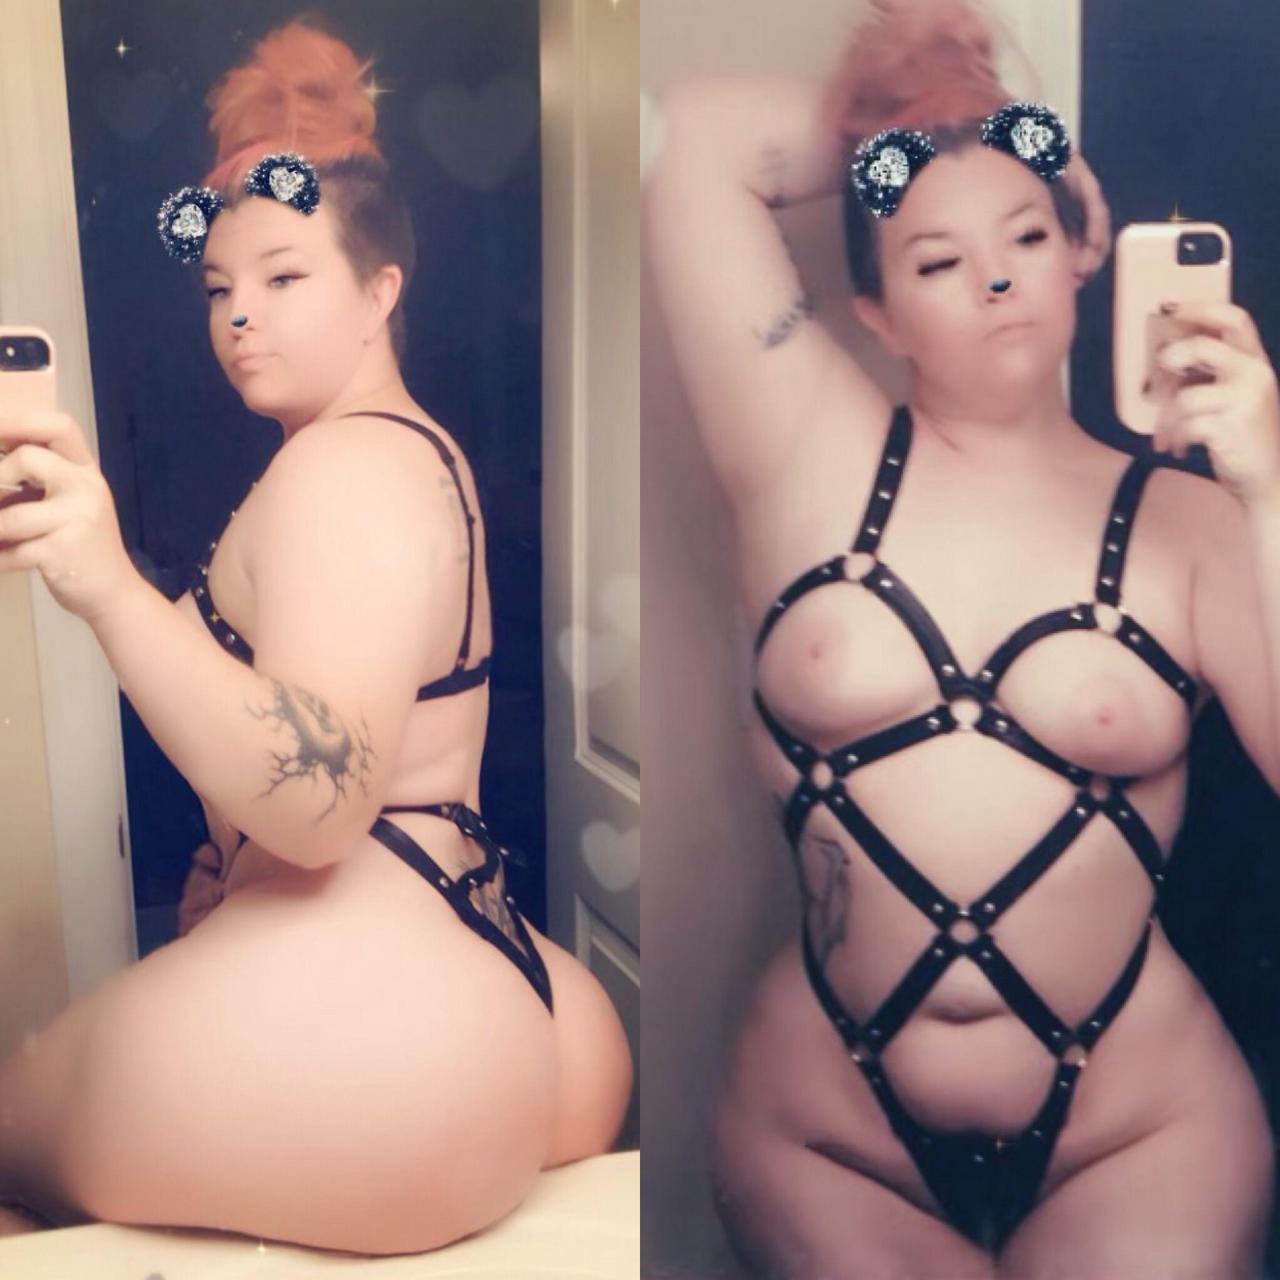 NSFW Testing Out My Monster Princess Bodysuit From One Punch Man Shooting This Set For Onlyfans Join Me For Uncensored Photos Videos And Adult Content Cosplayerbaroness Von T Character Monste